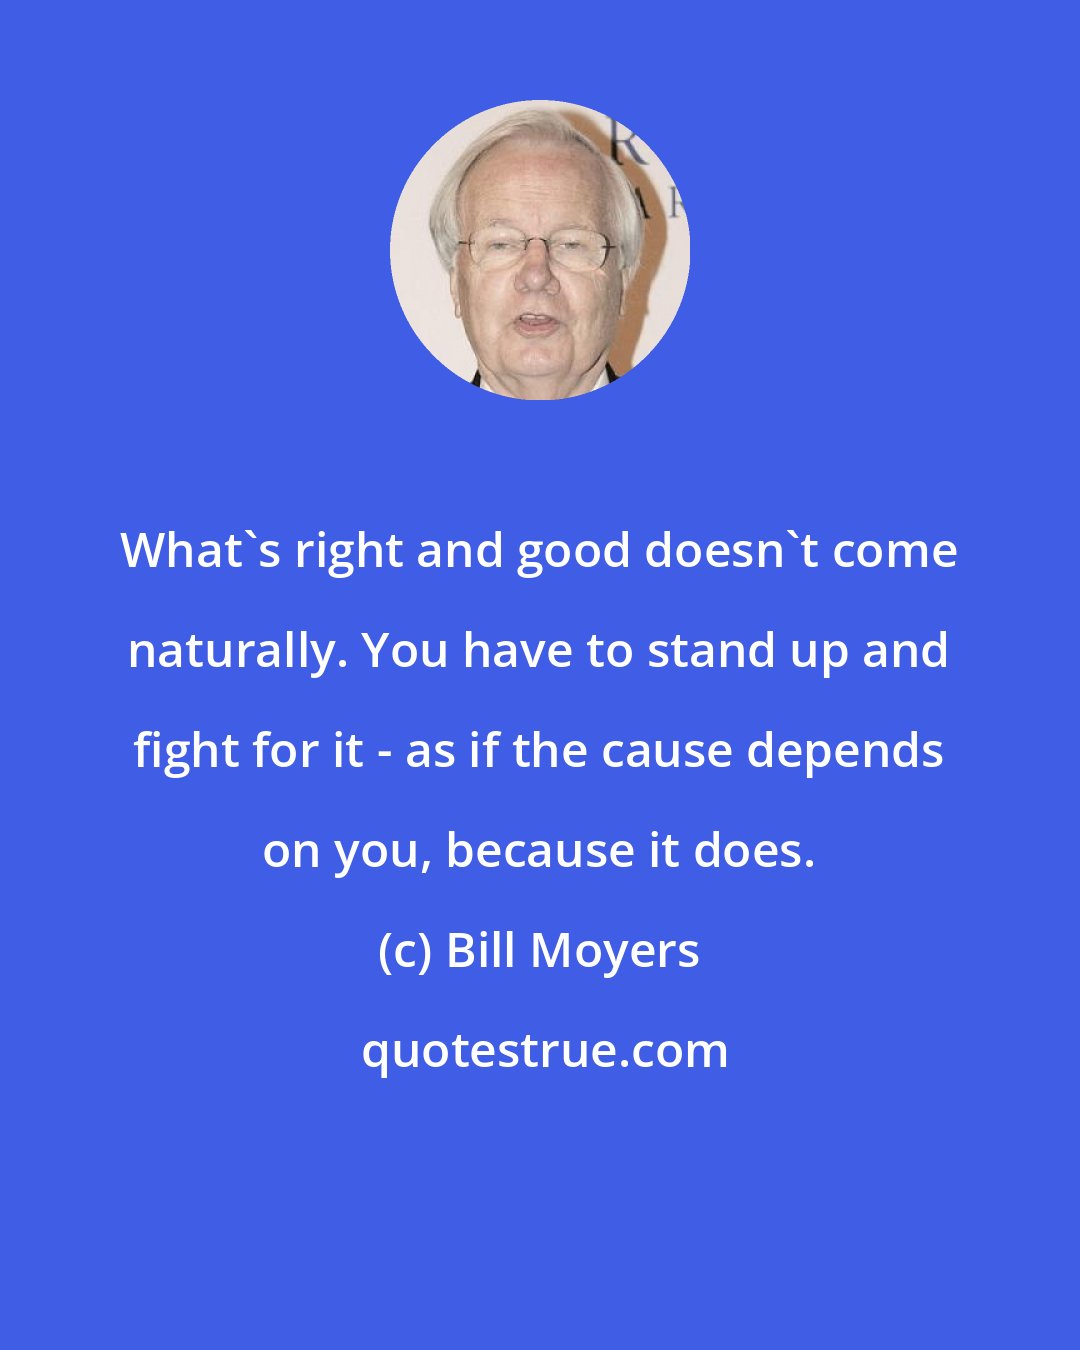 Bill Moyers: What's right and good doesn't come naturally. You have to stand up and fight for it - as if the cause depends on you, because it does.